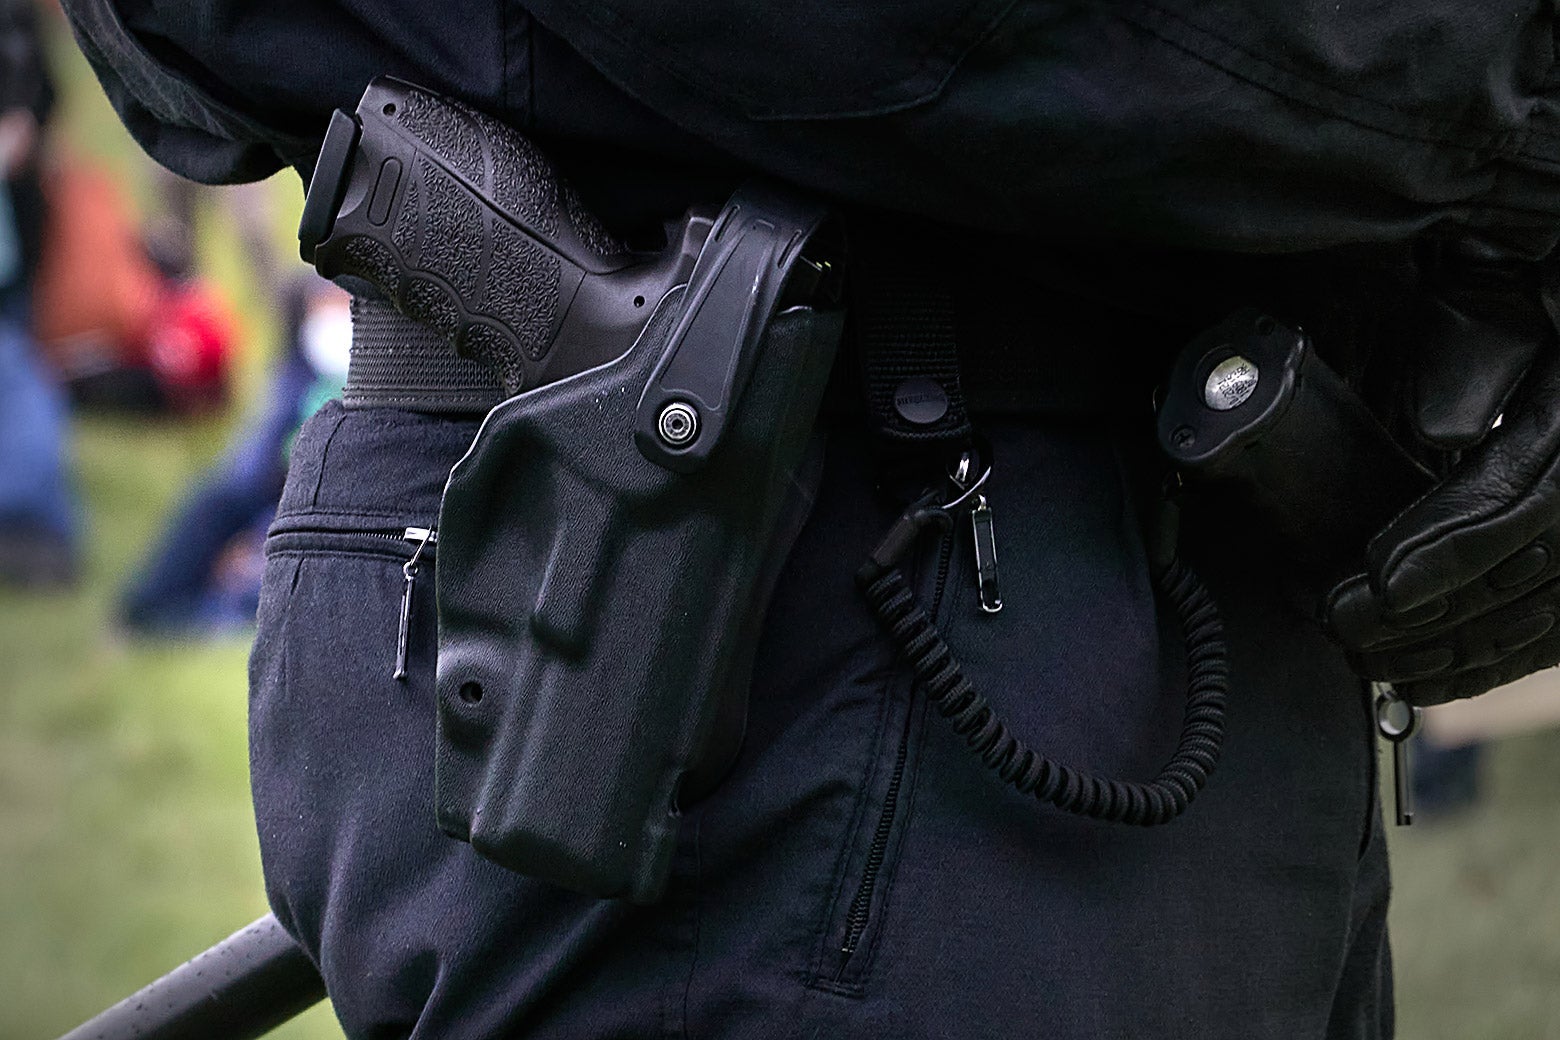 A pistol in the holster of a uniformed police officer wearing leather gloves.